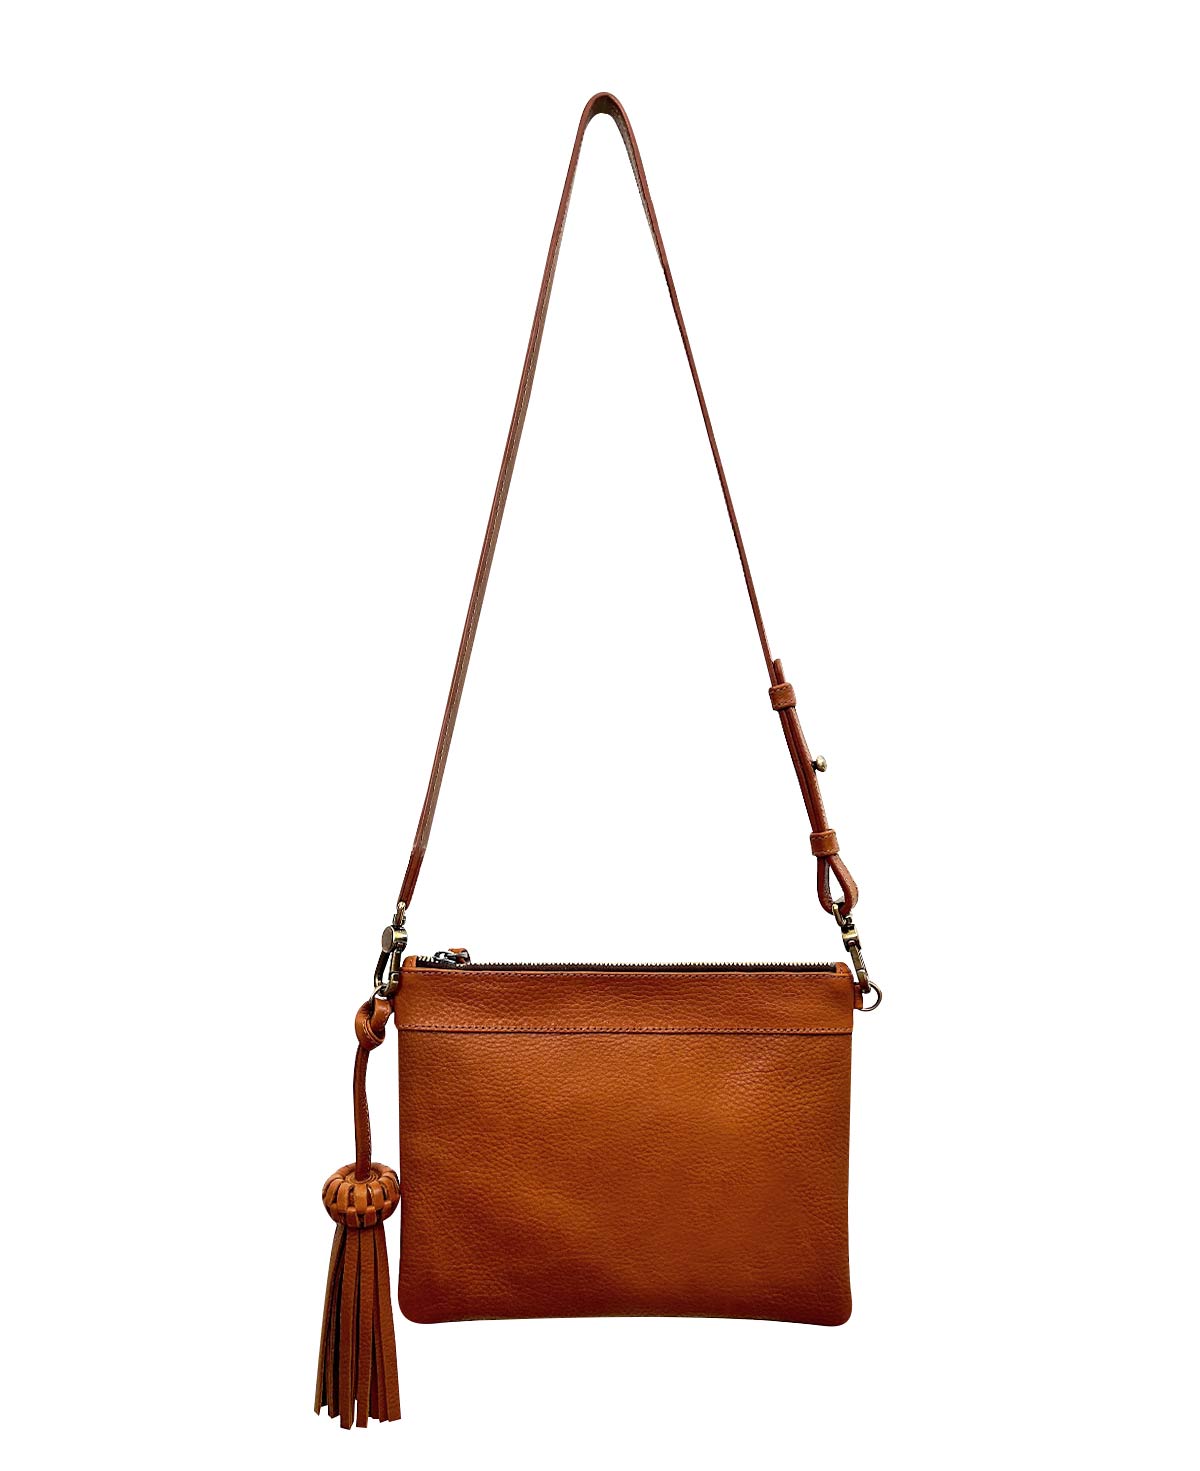 Almost Perfect Sale | Portland Leather Goods – tagged 